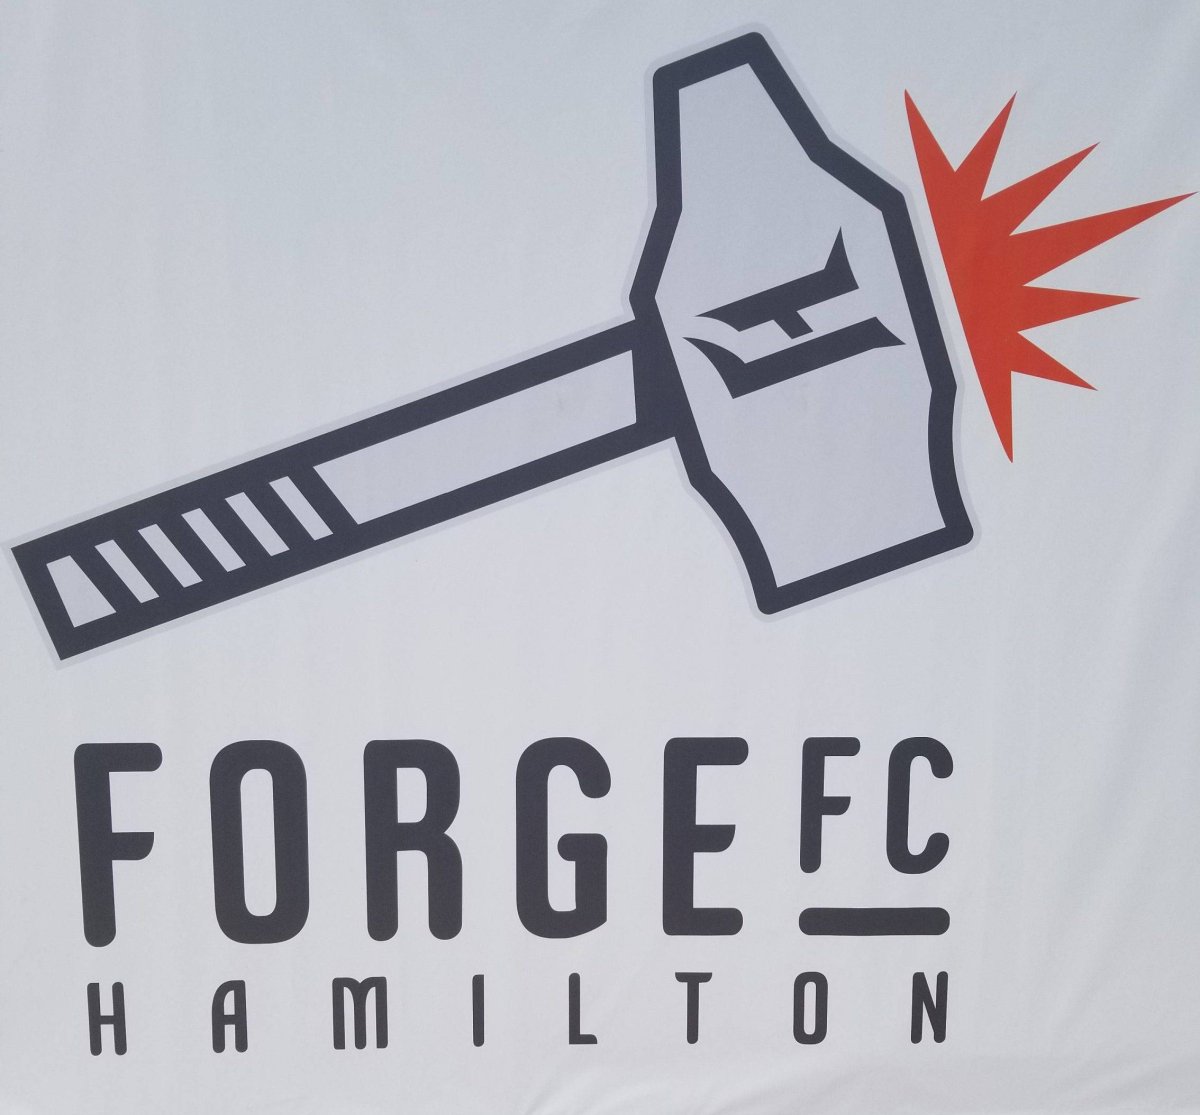 Forge FC will host York9 FC at Tim Hortons Field in the Canadian Premier League's inaugural match Saturday, April 27 at 1 p.m.